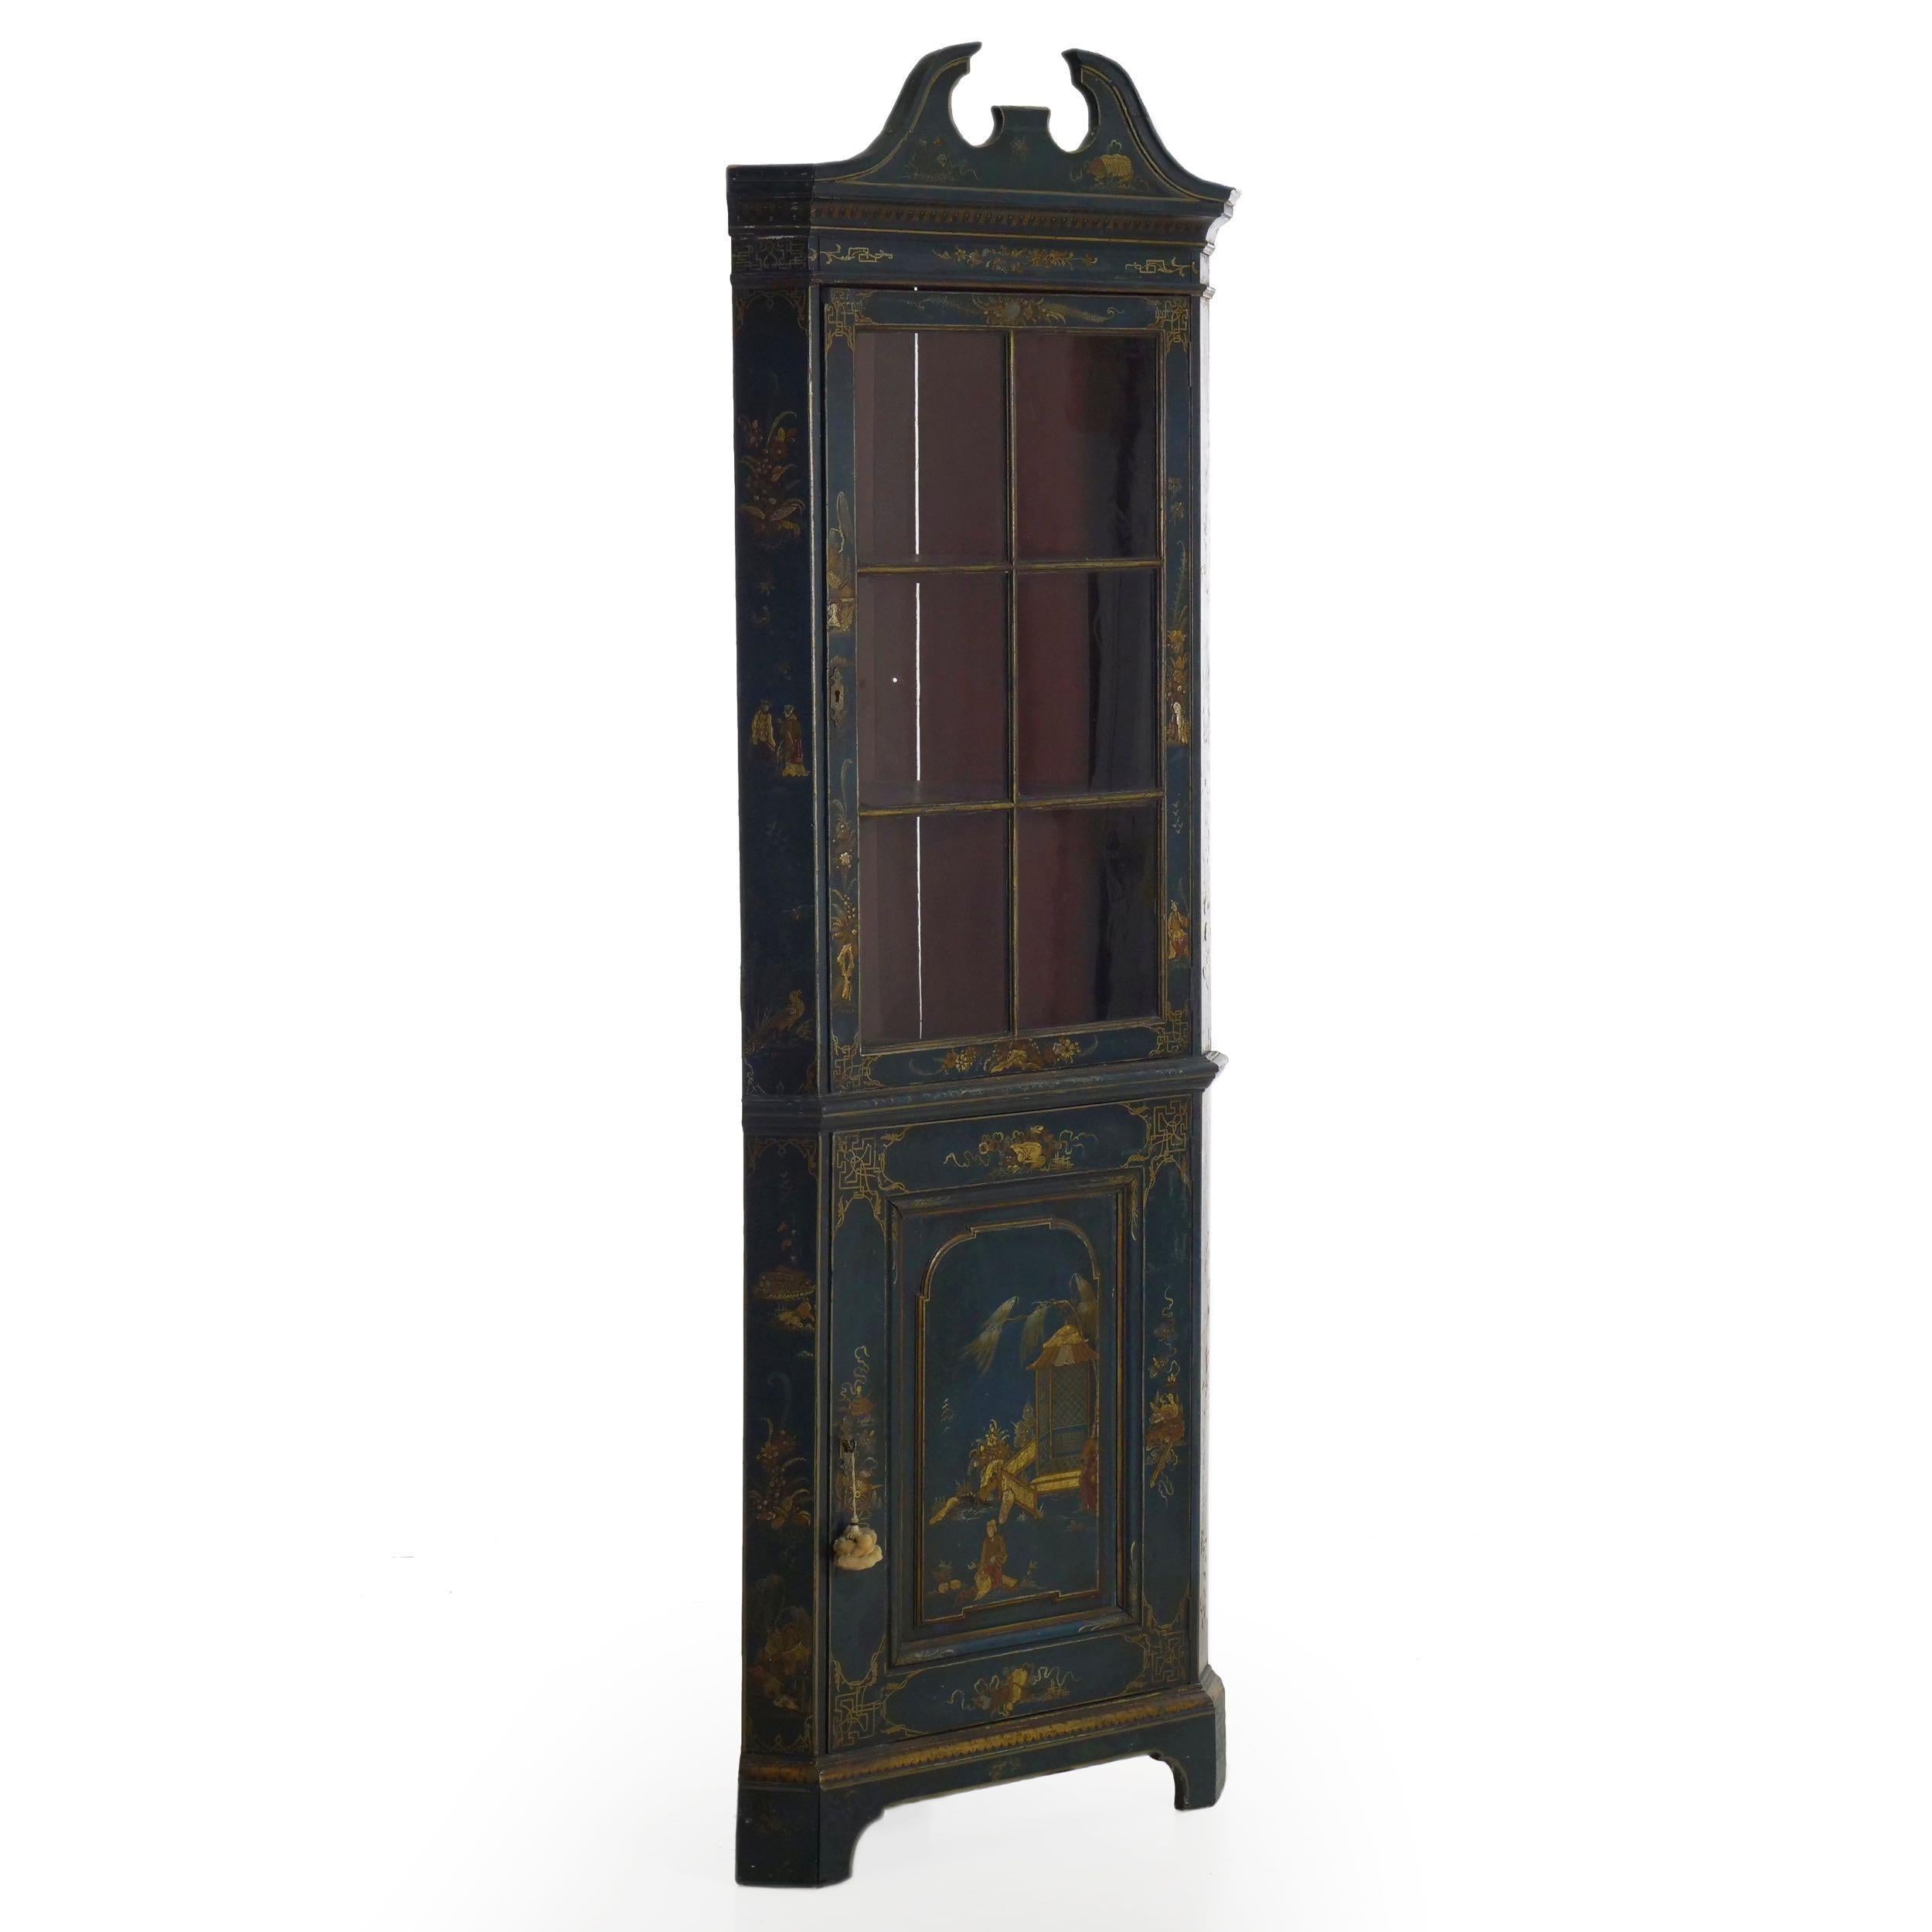 A special piece for its restrained dimensions and exquisite surface decorations throughout, this Fine George III corner cabinet exhibits an overall blue painted surface highlighted by embossed and stenciled 